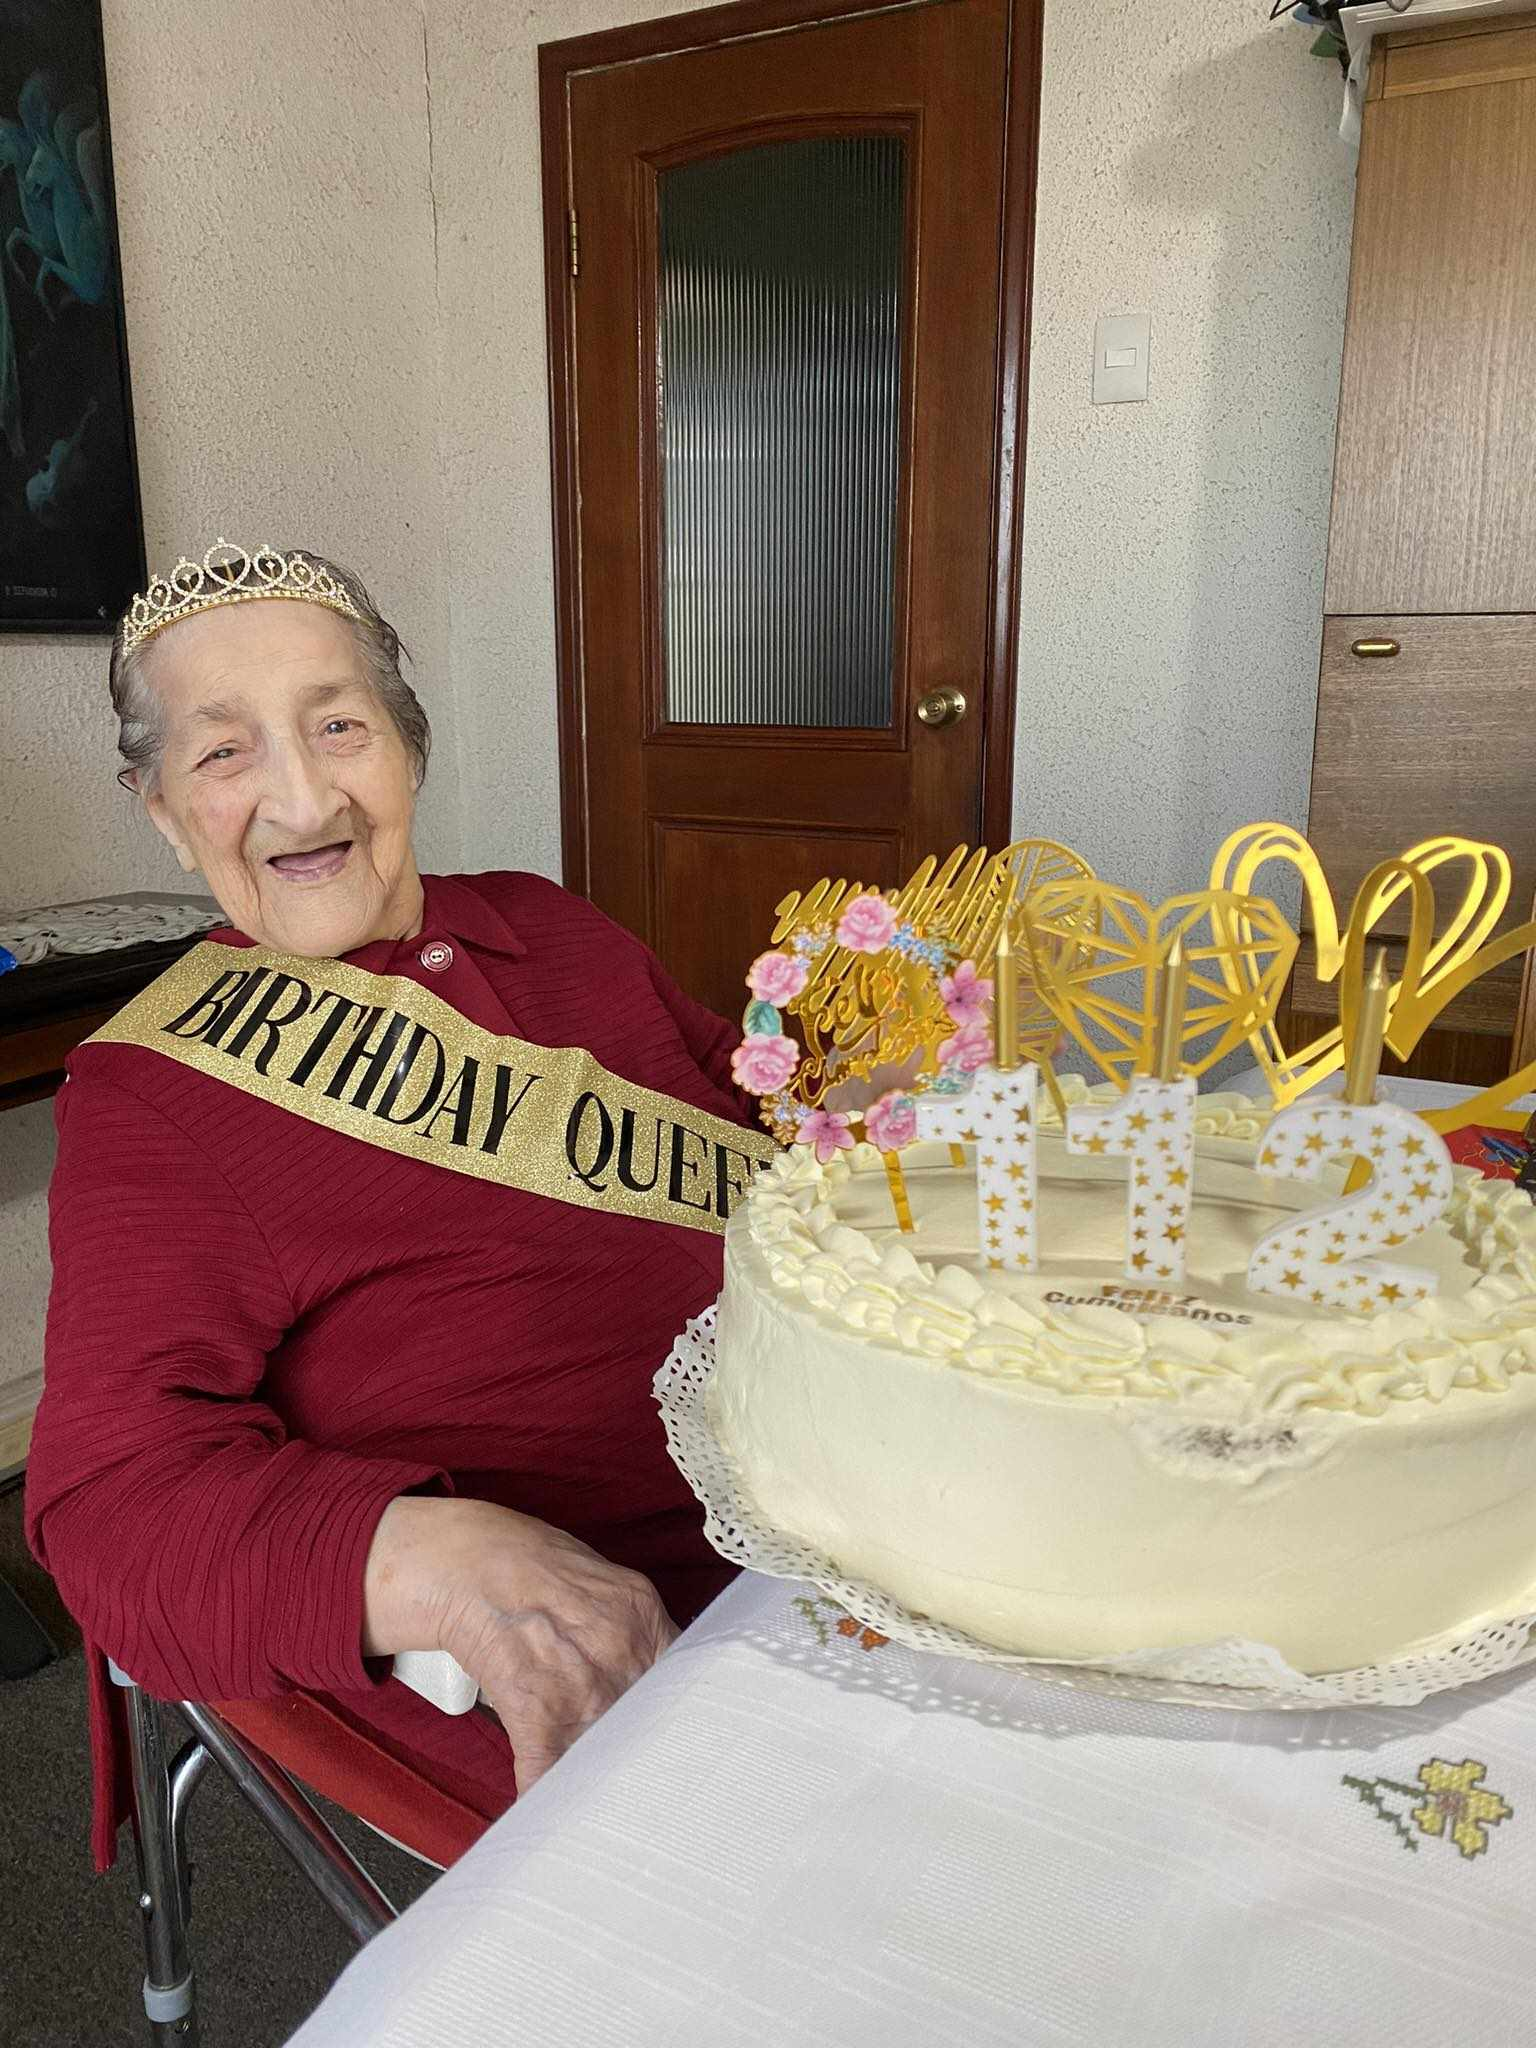 On her 112th birthday in 2023. (Source: Courtesy of the family)